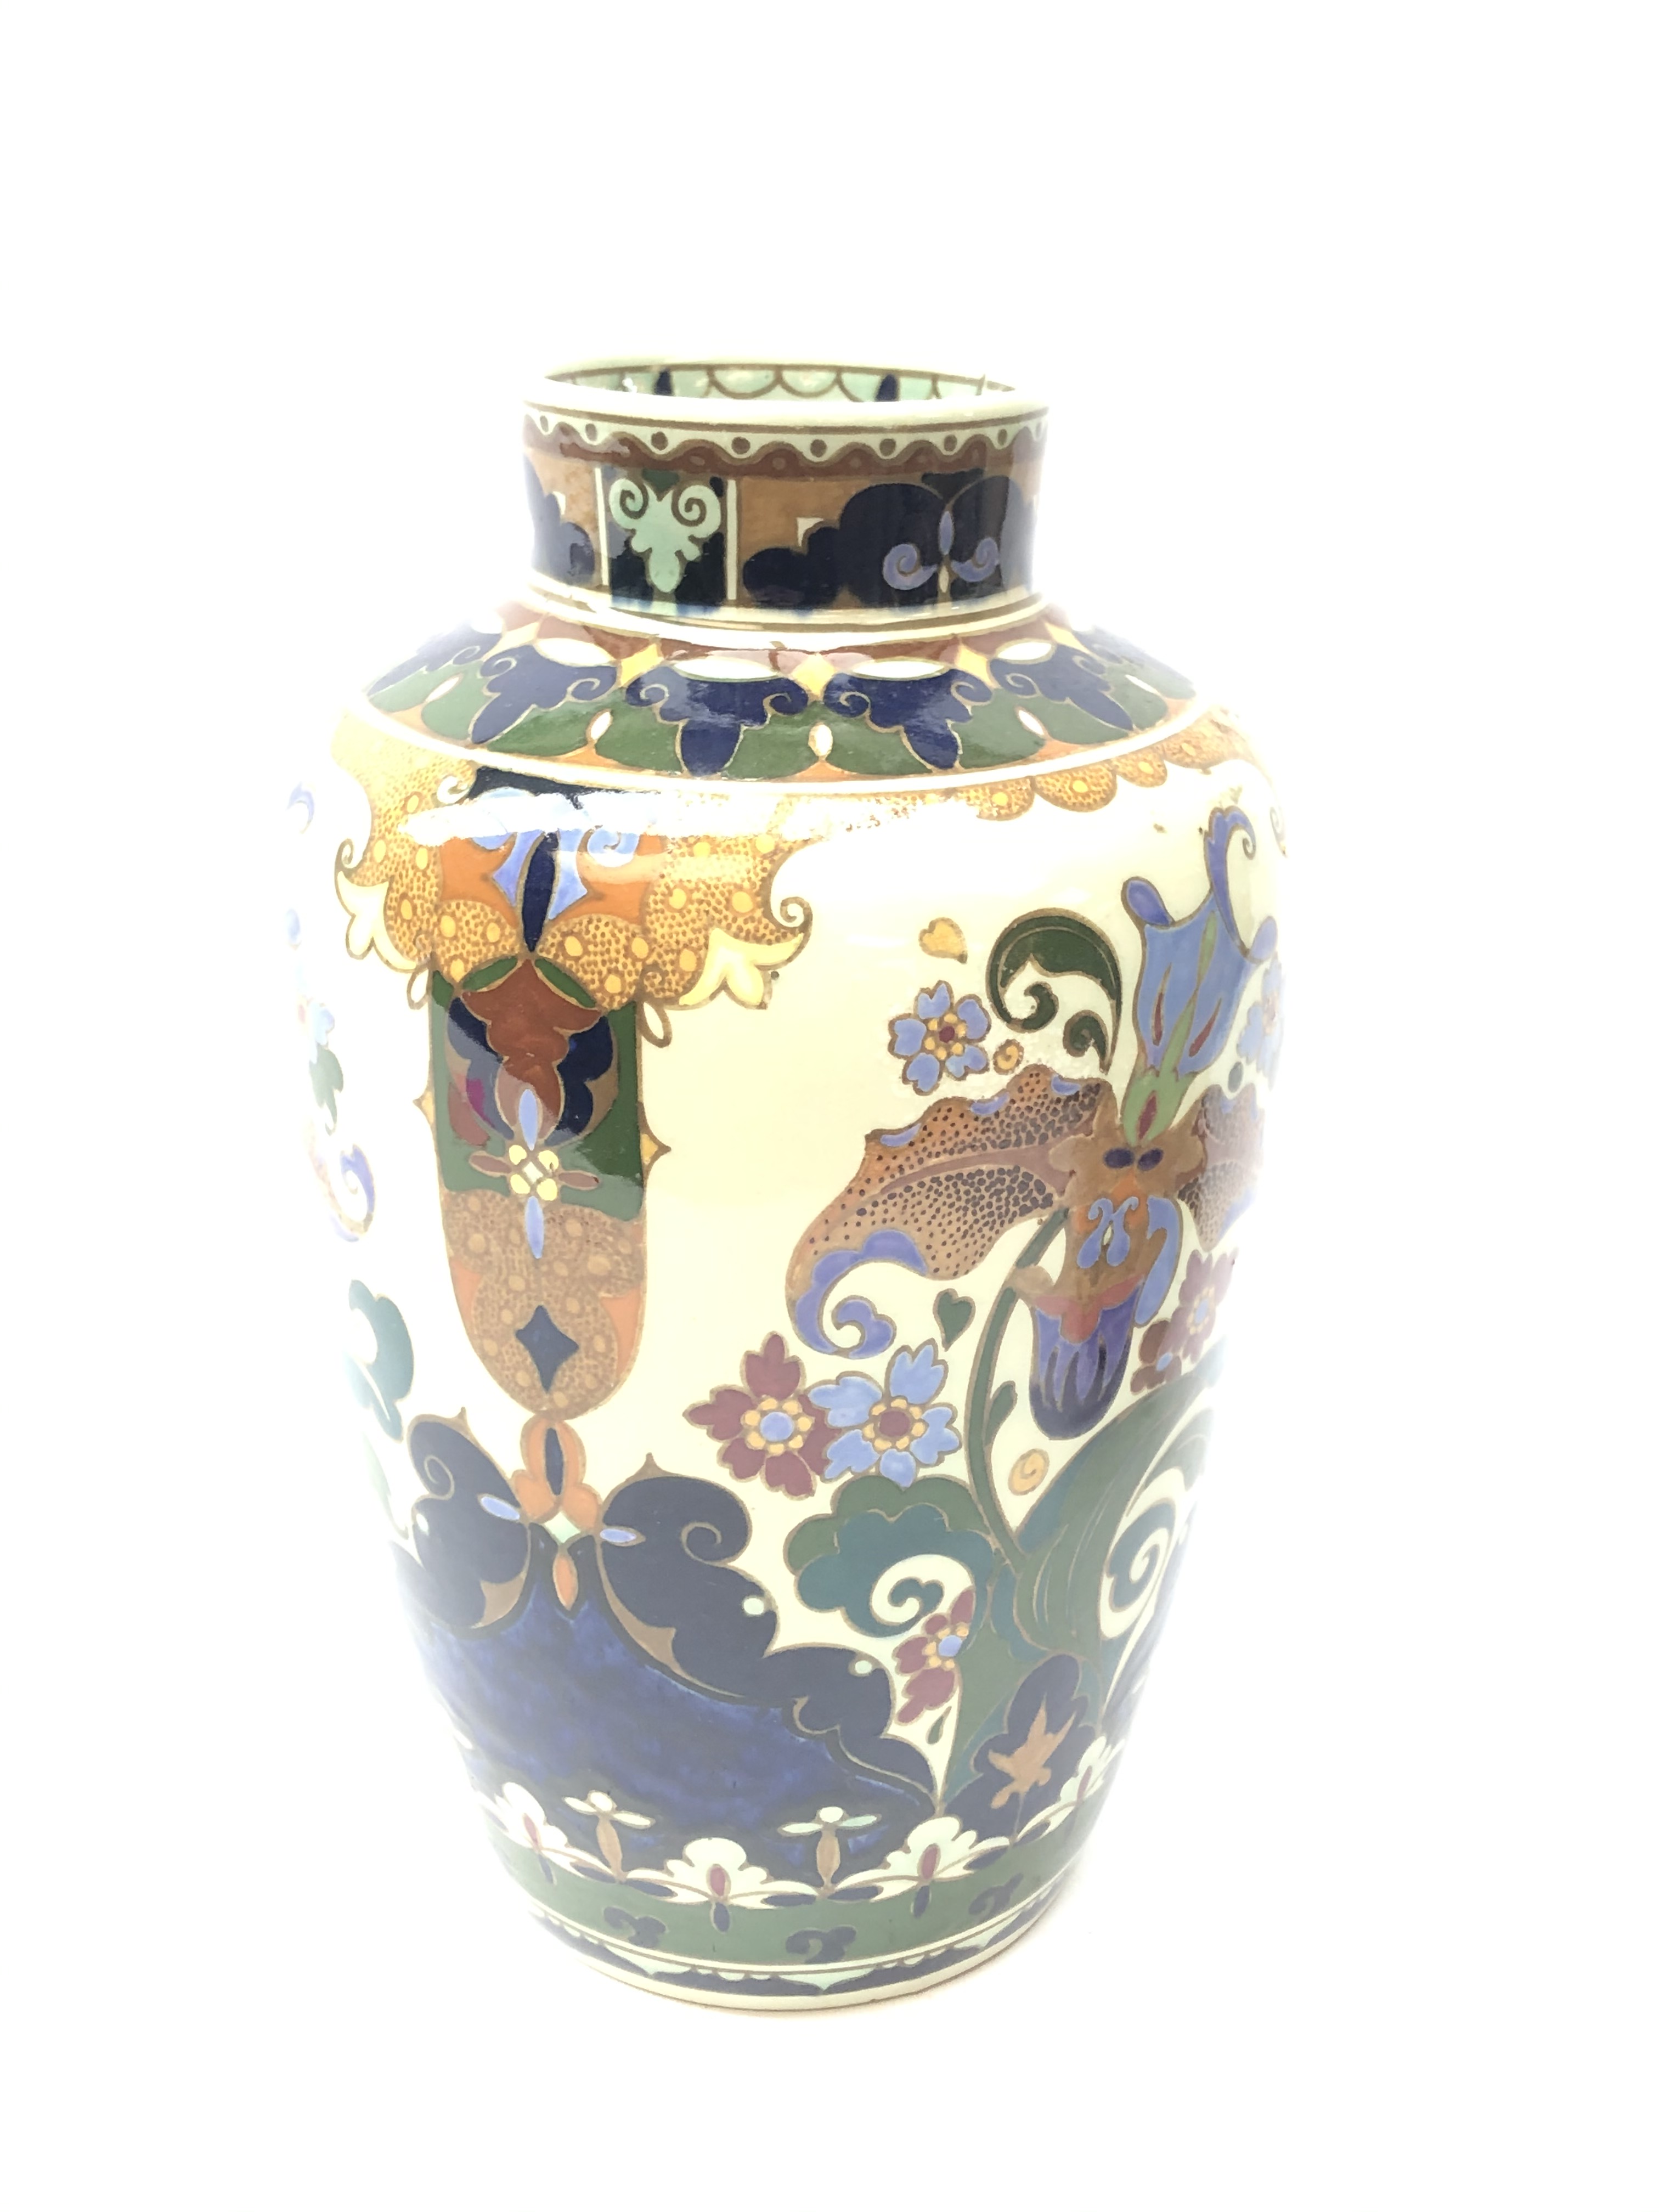 Rozenburg Den Haag vase decorated with exotic birds and flowers on pattern ground, - Image 2 of 5